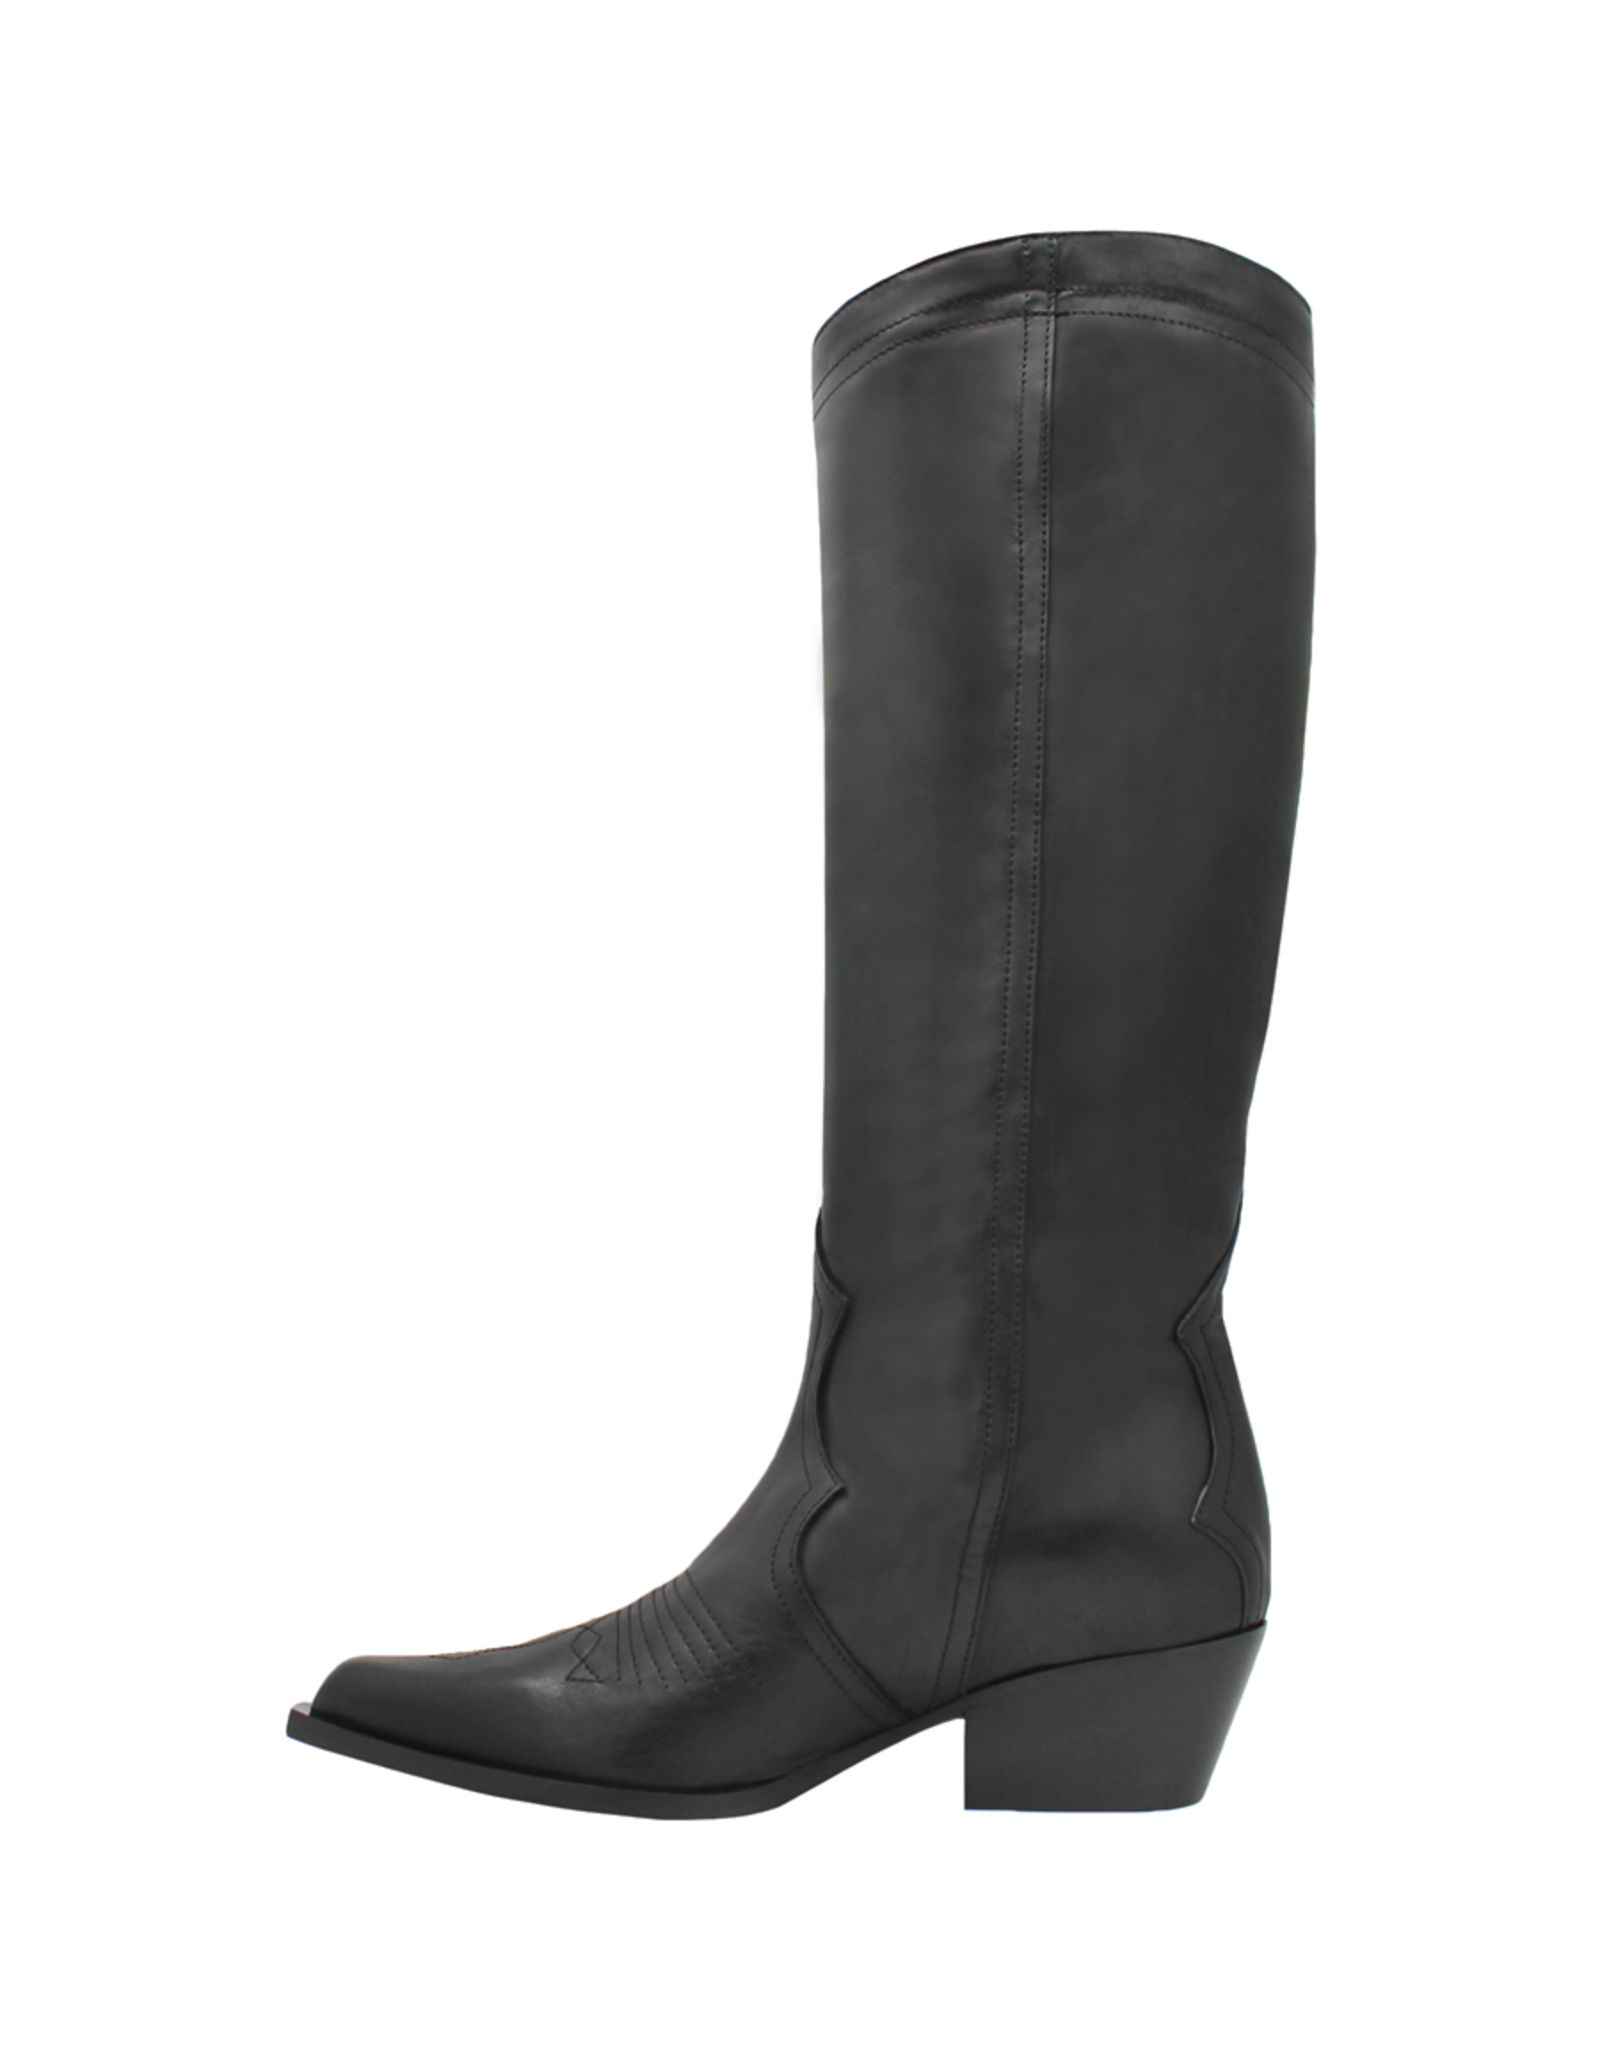 Now Now Black Western Knee Boot 7856